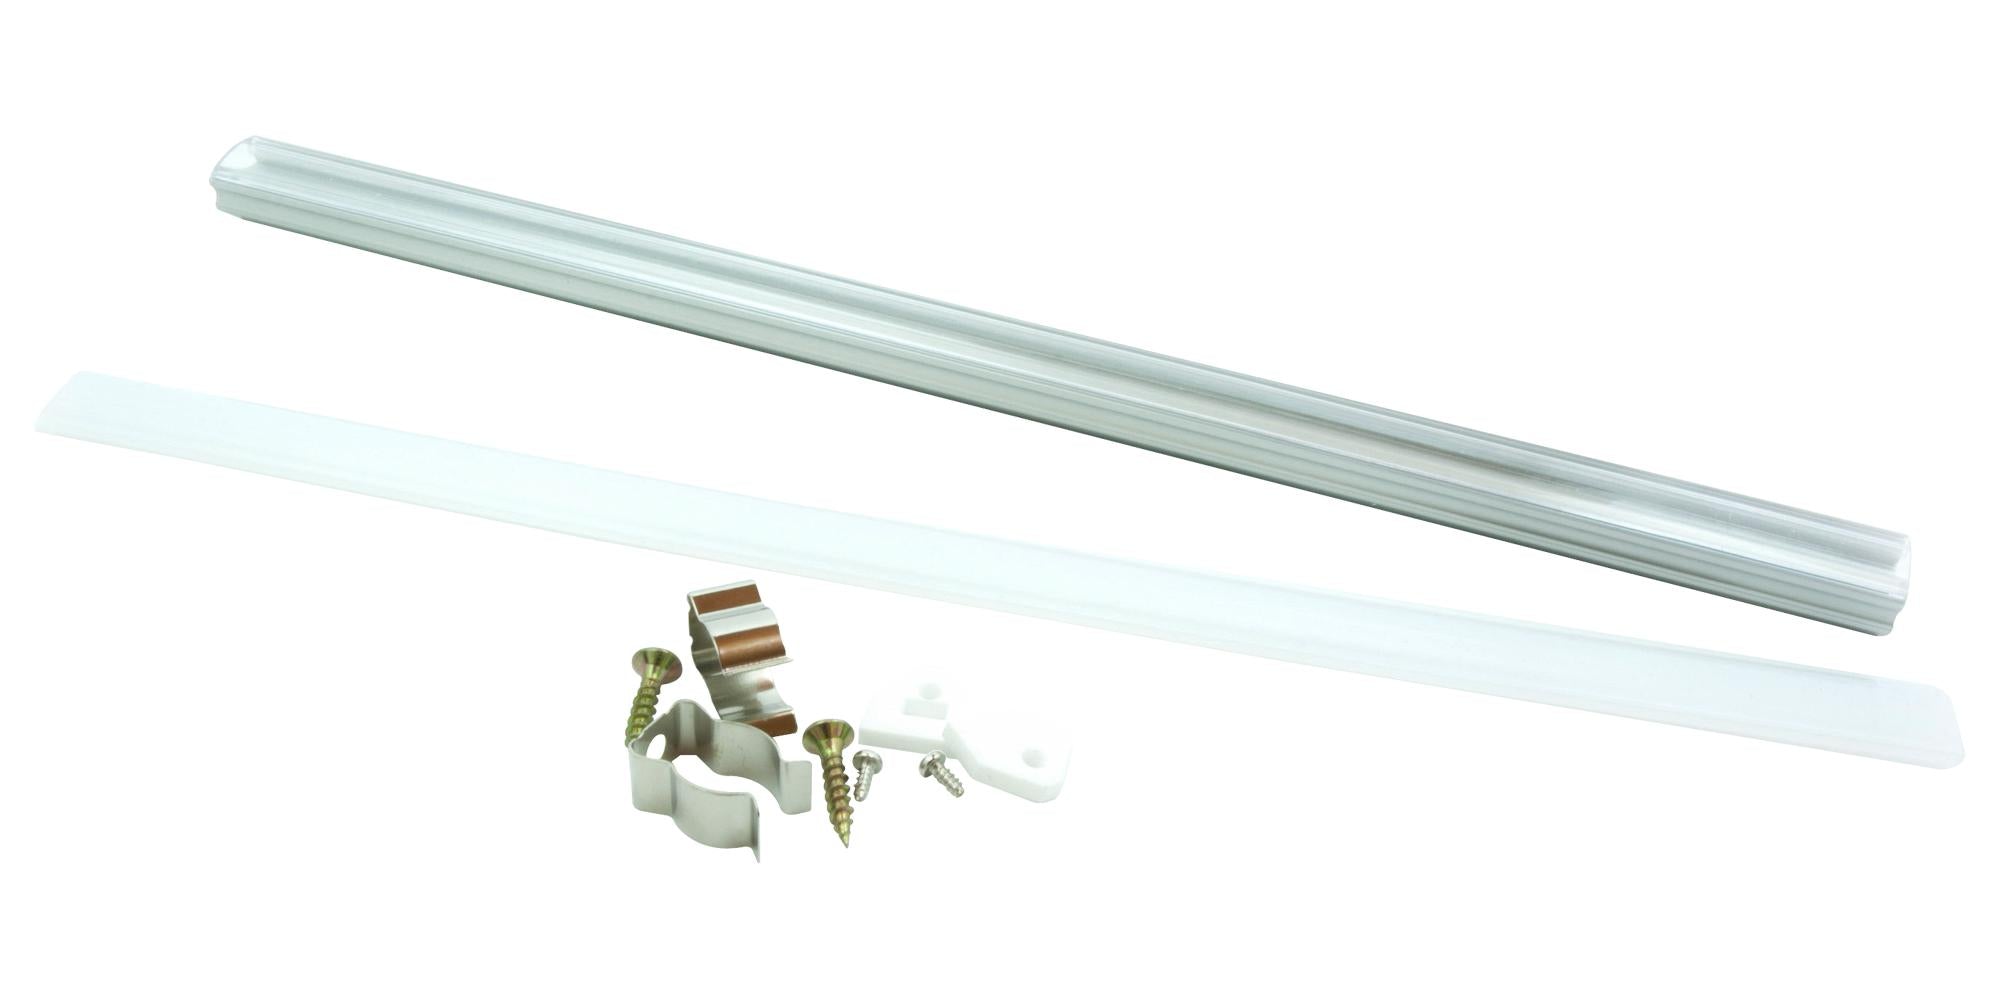 ILK-FLEXEXT-1000-002. KIT, LED STRIP, ANGLED EXTRUSION, 1M INTELLIGENT LED SOLUTIONS